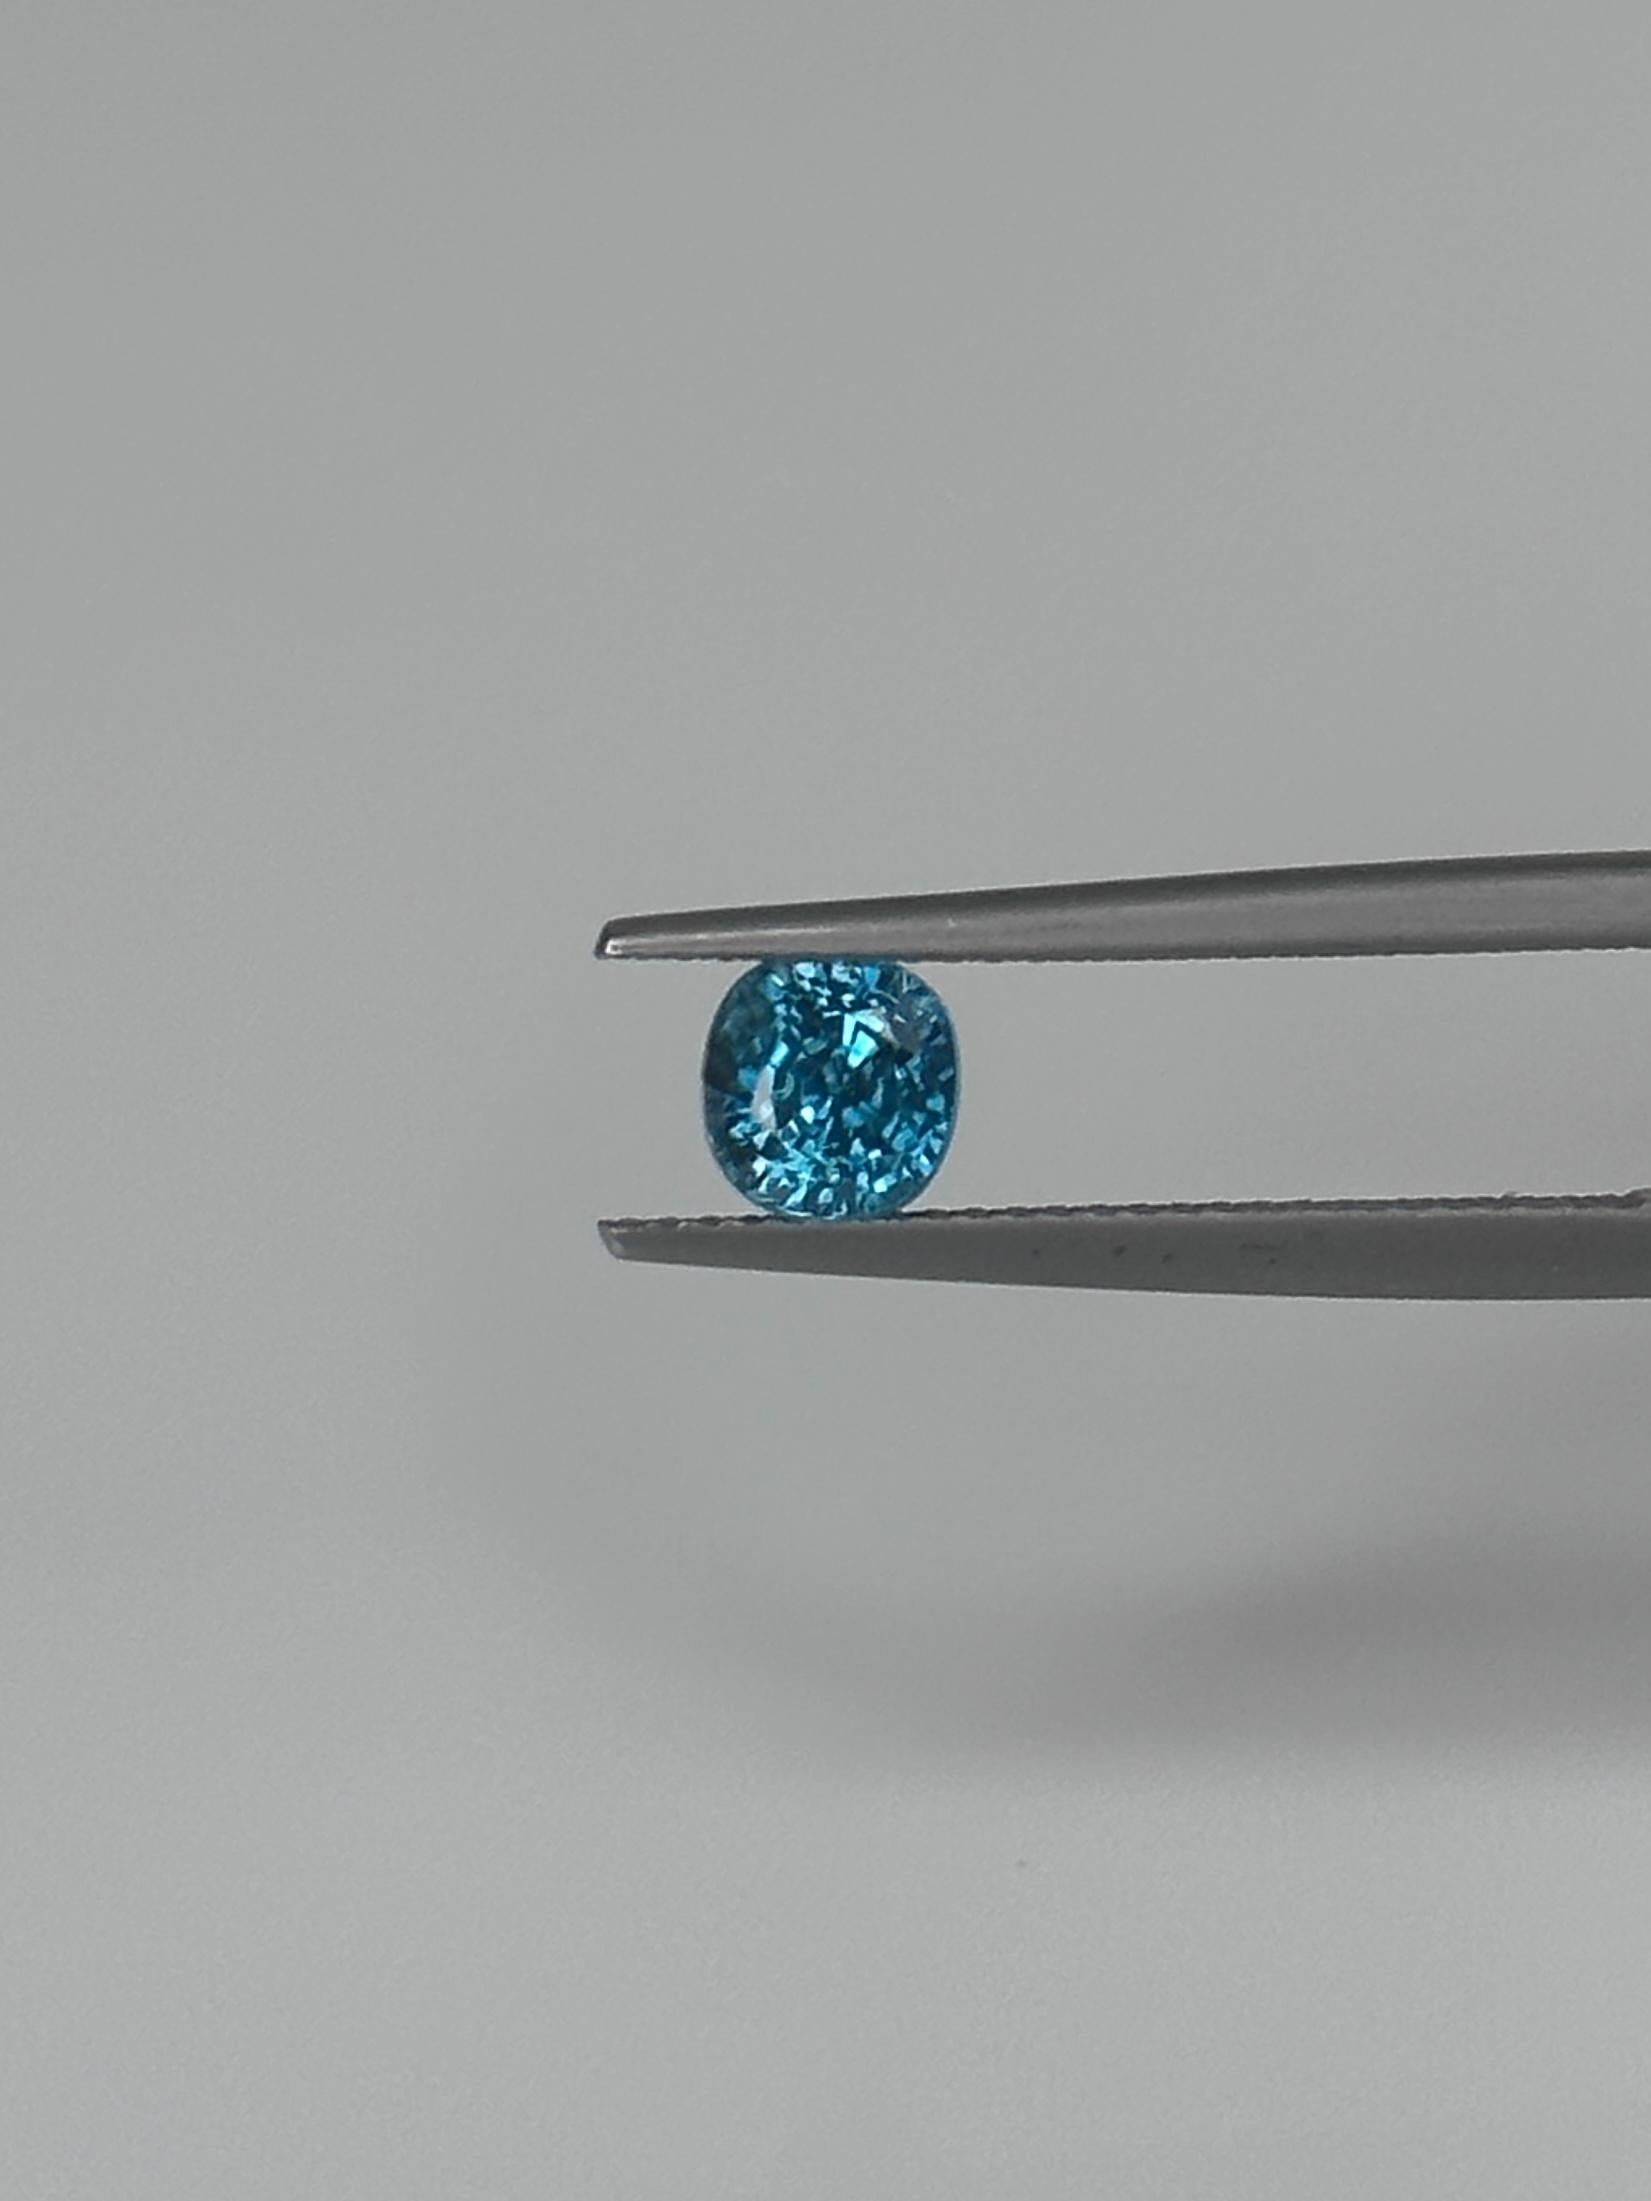 Sparkling Cushion-cut Sky Blue Zircon

This 1.52 carat Blue Zircon has an impressive fire and a pure light blue color. Giving it the 